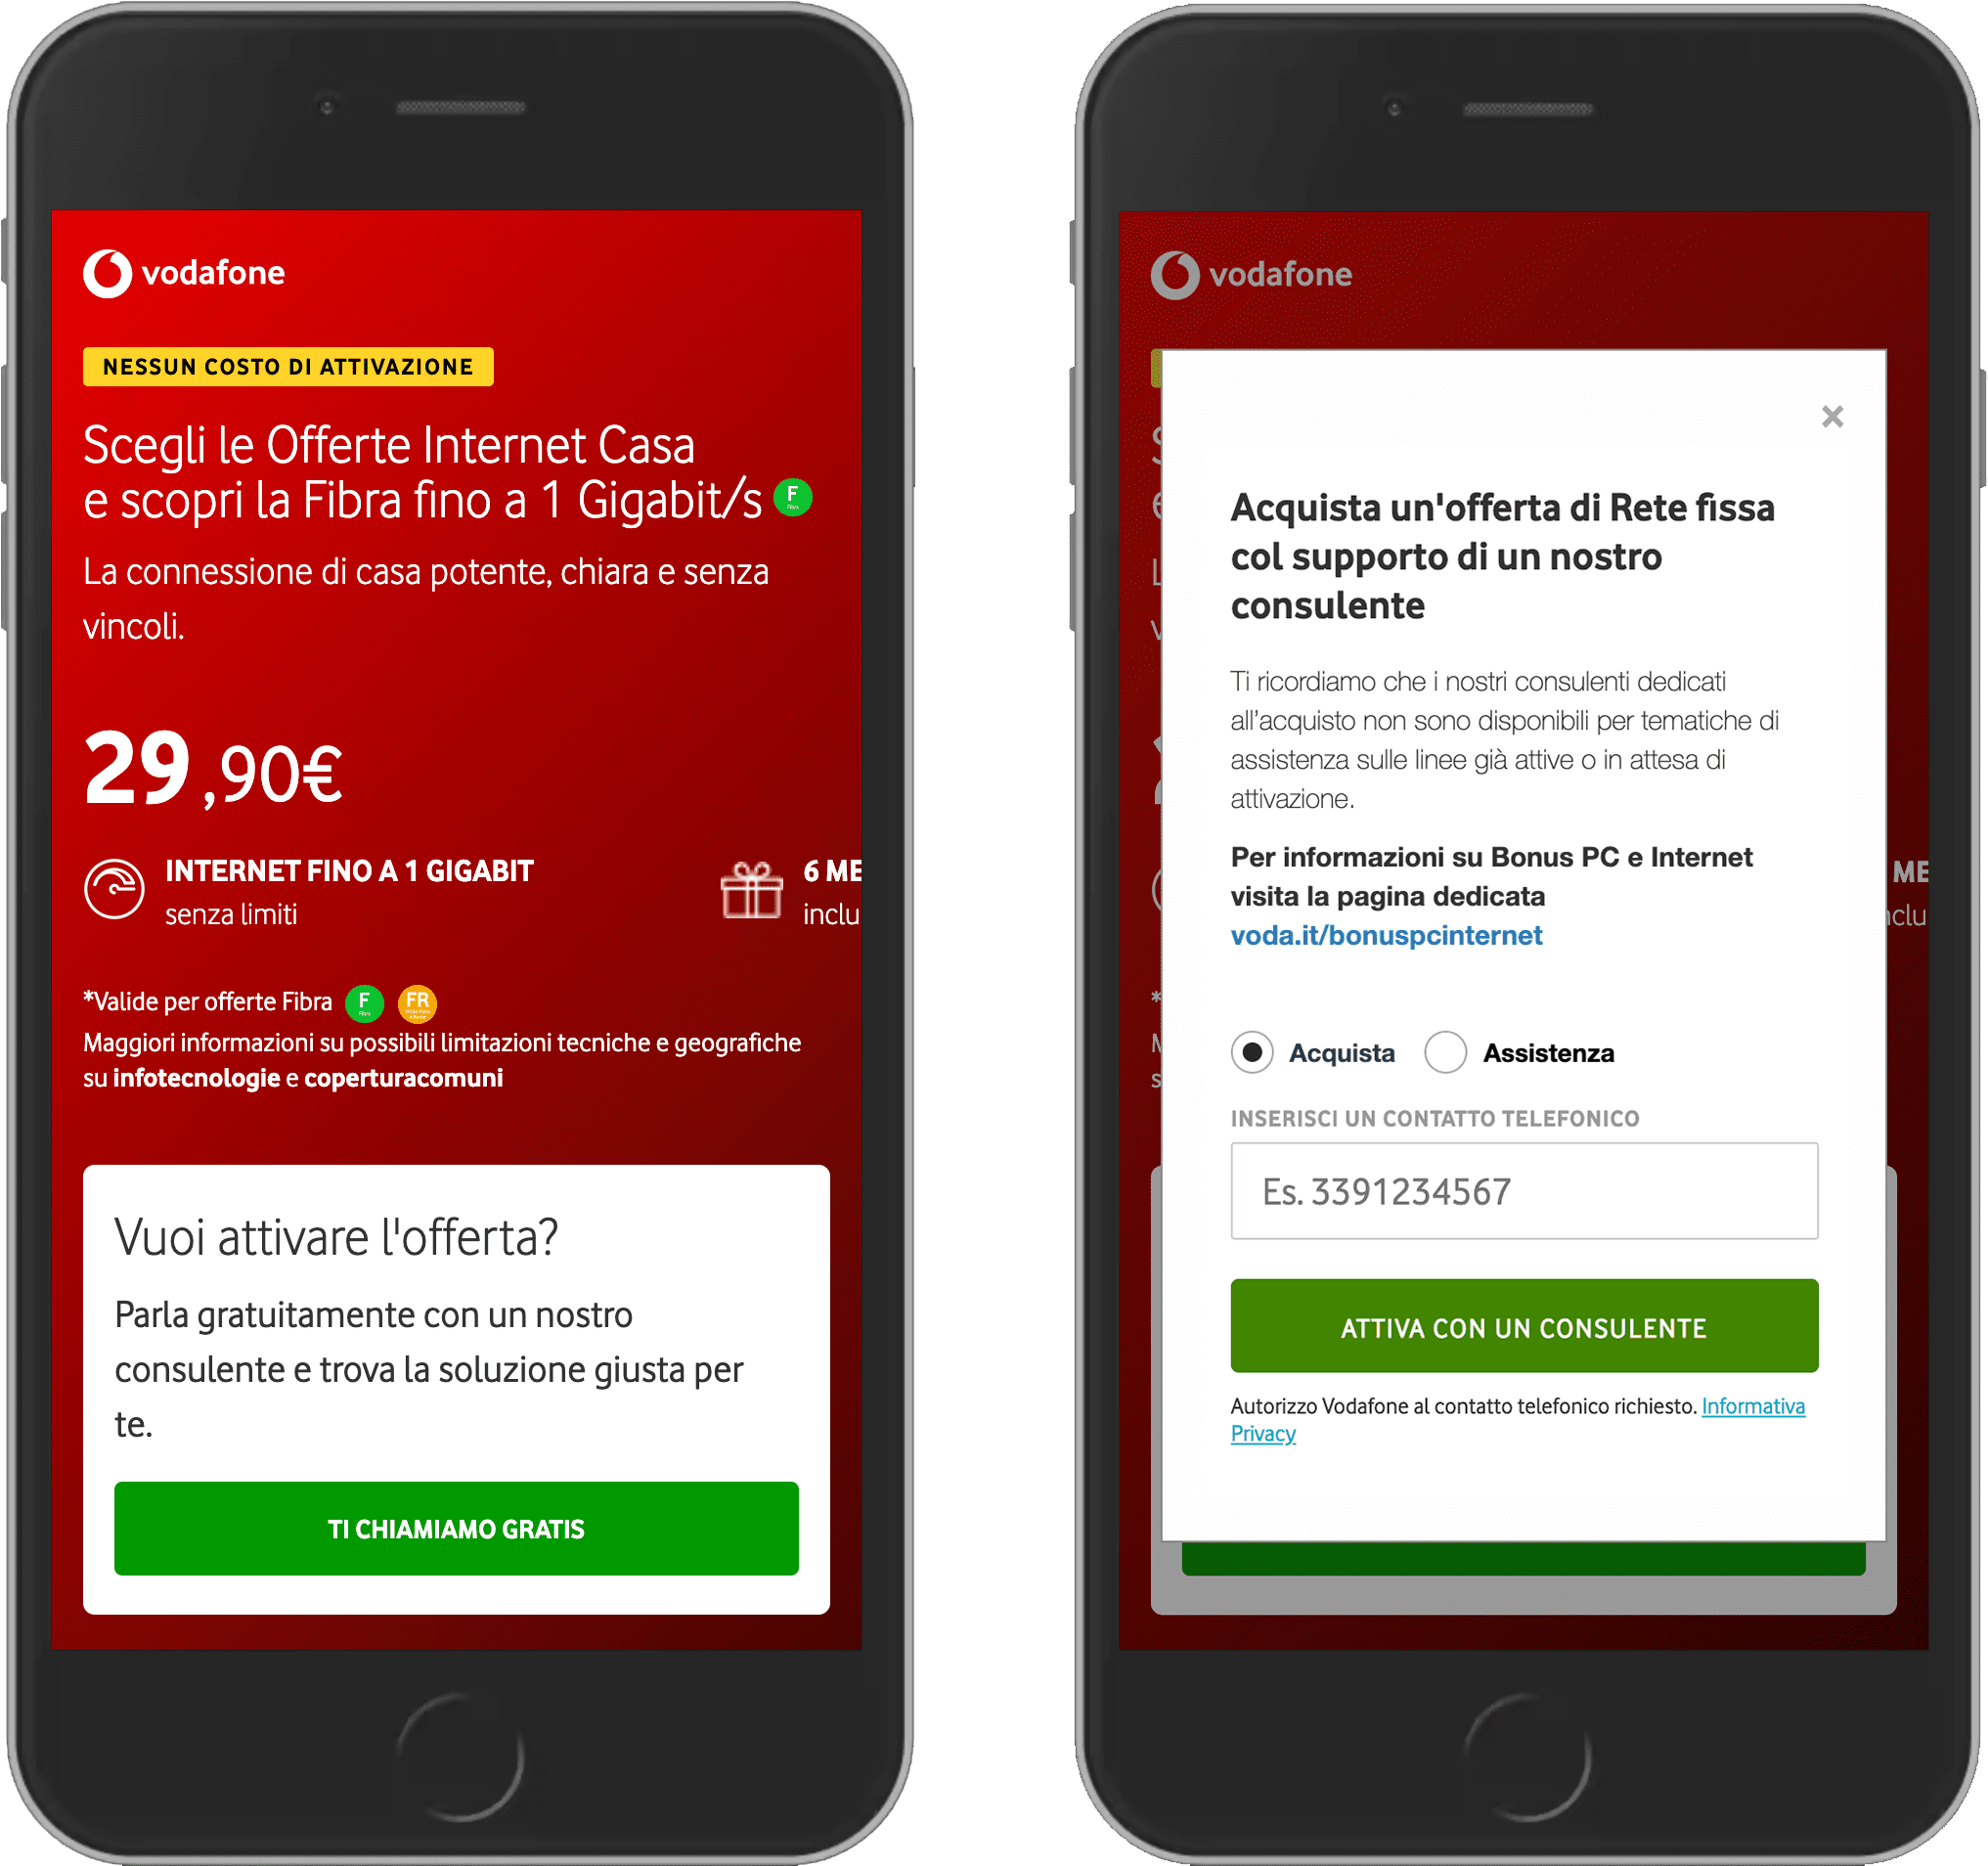 Two screenshots of the Vodafone website.